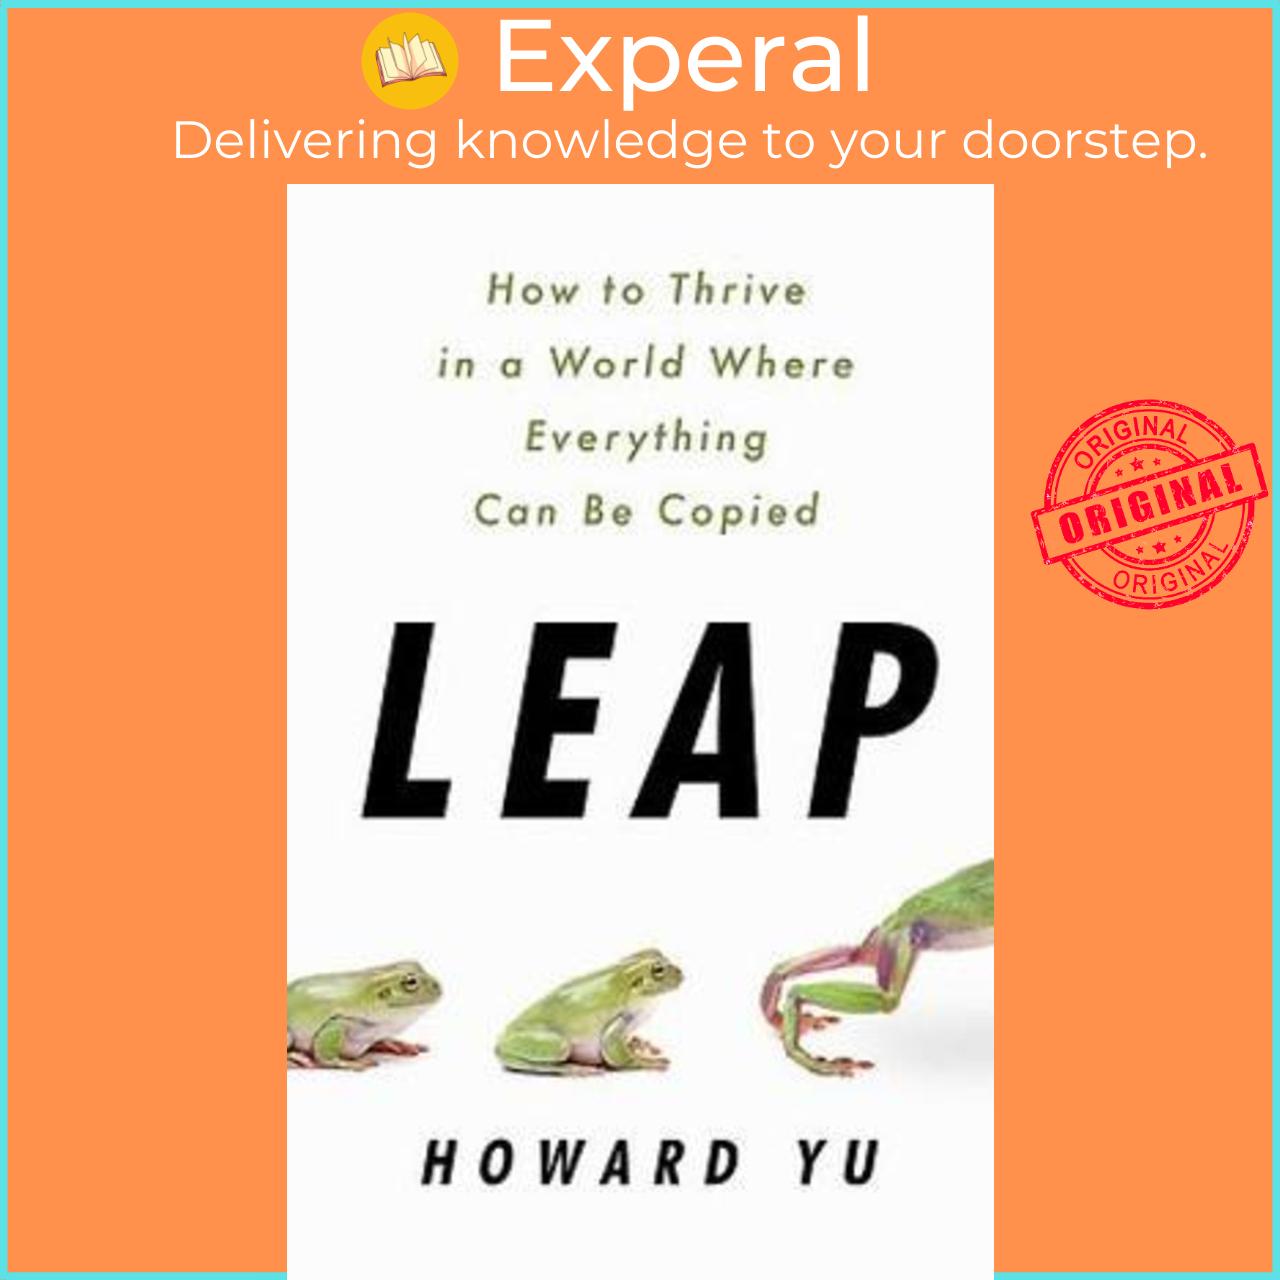 Sách - Leap : How to Thrive in a World Where Everything Can Be Copied by Howard Yu (US edition, paperback)